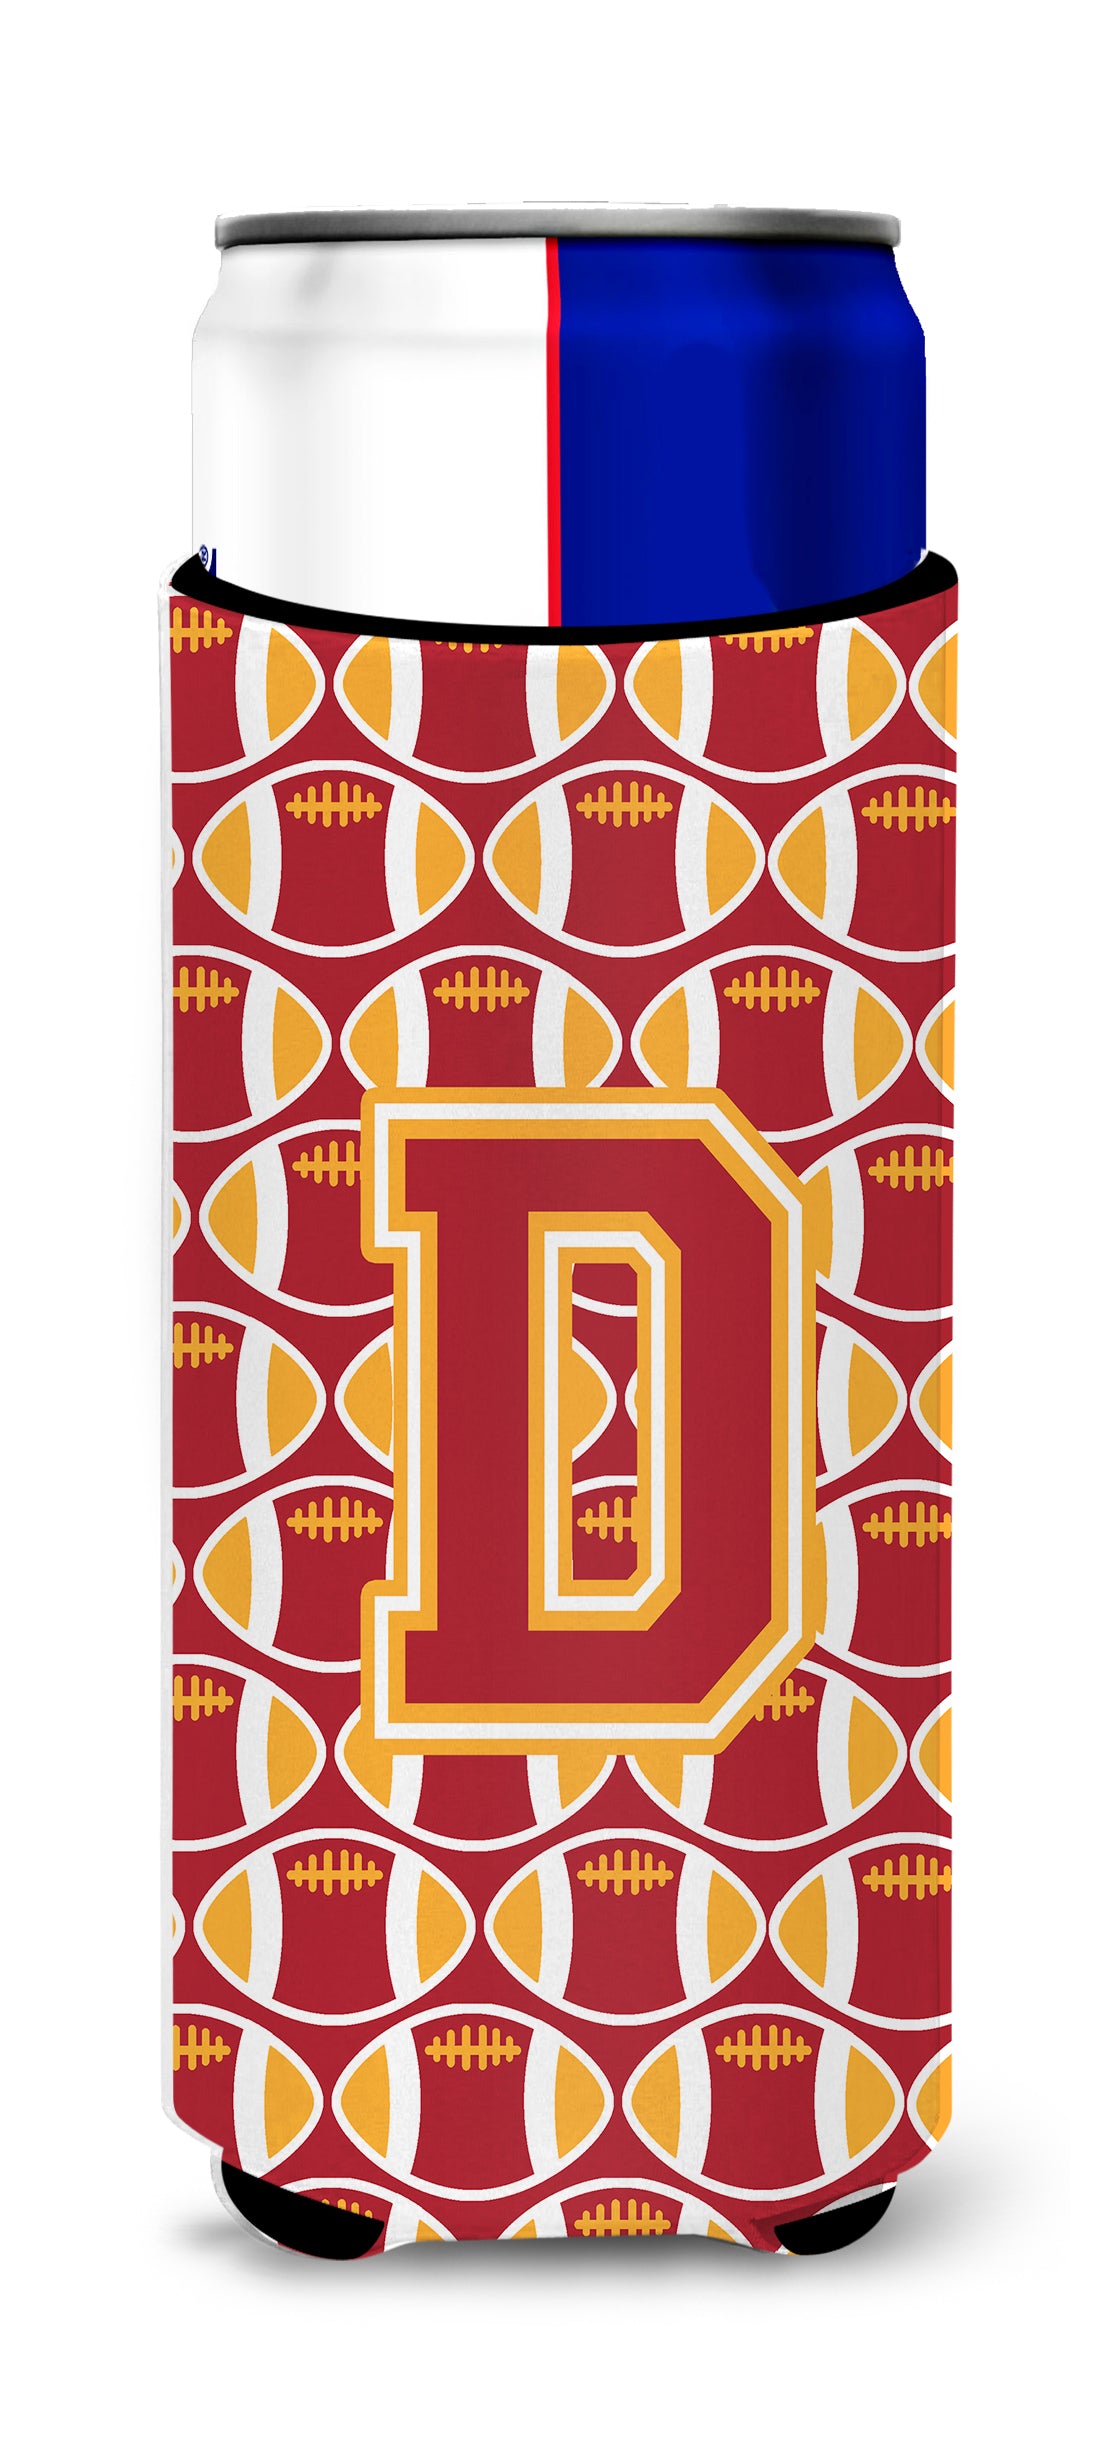 Letter D Football Cardinal and Gold Ultra Beverage Insulators for slim cans CJ1070-DMUK.